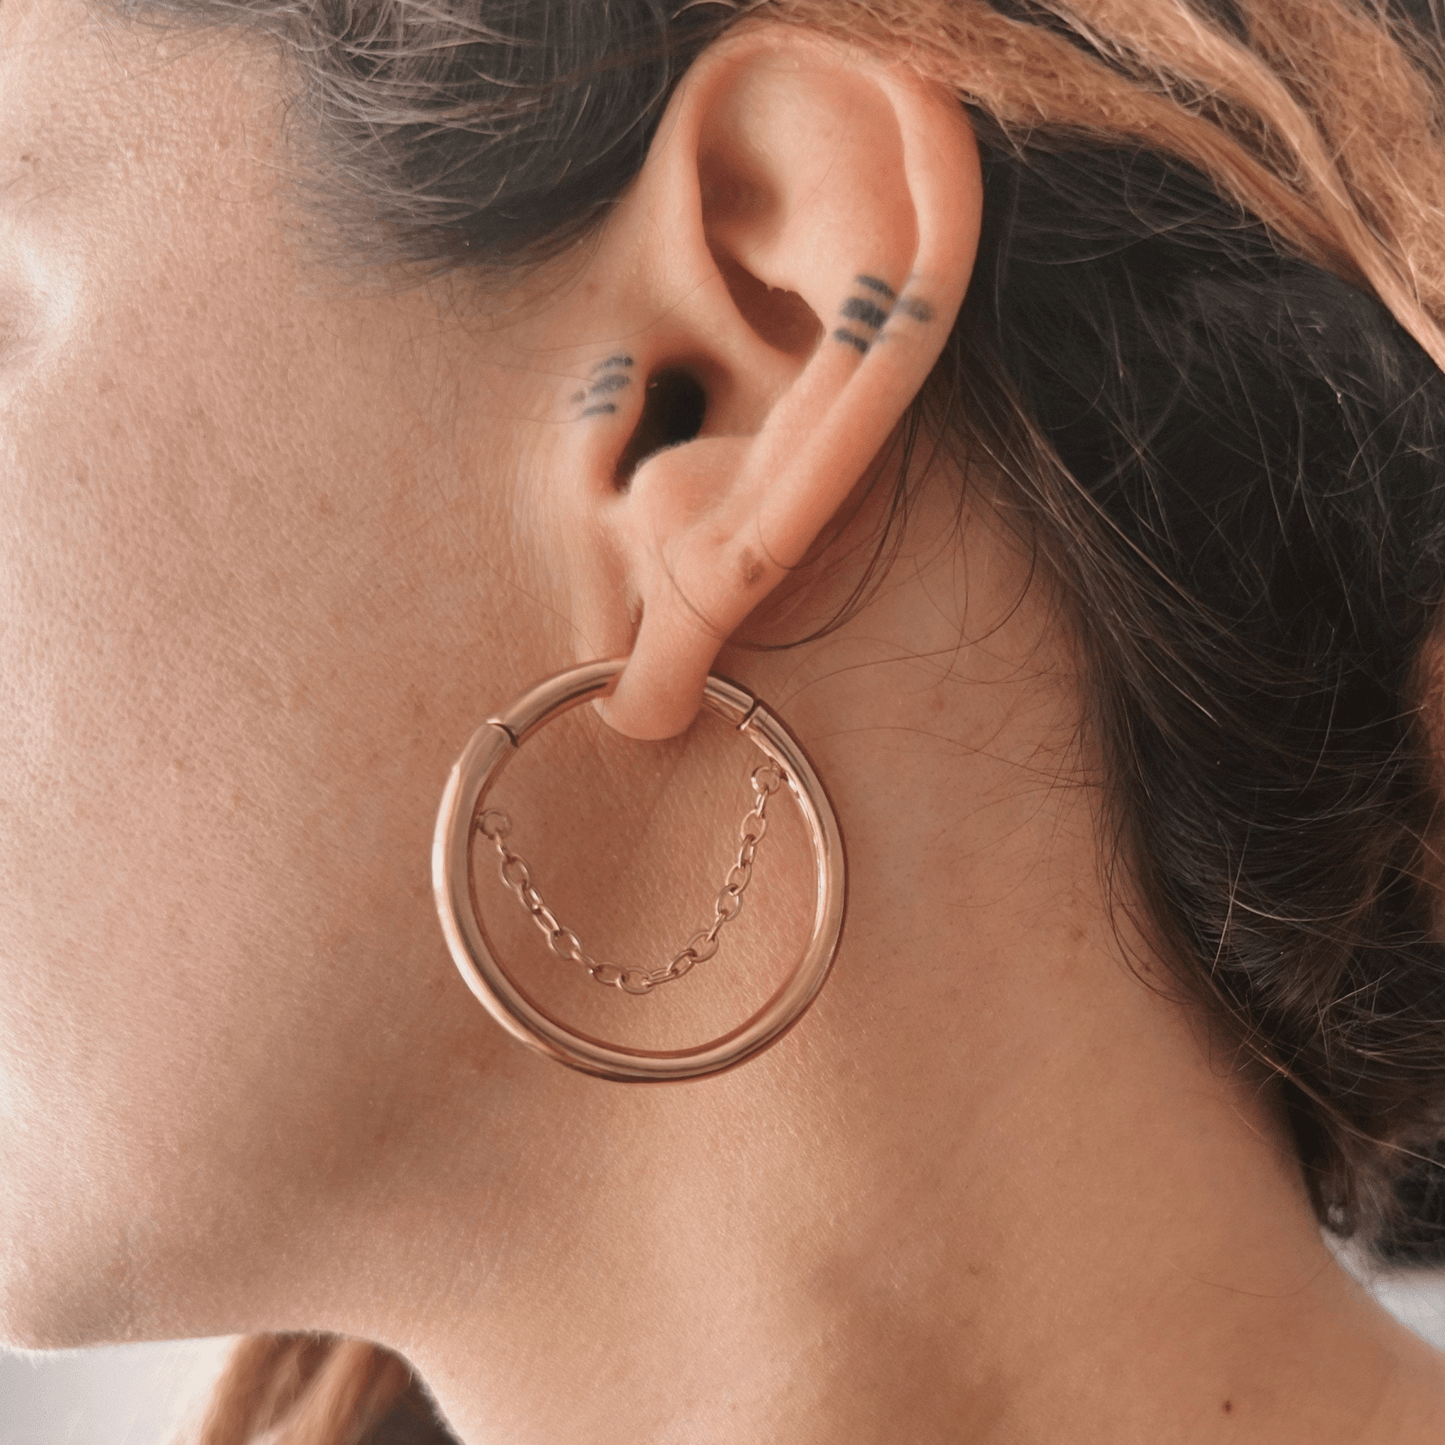 Hoop Ear Weights With Centred Chain - DustyJewelz